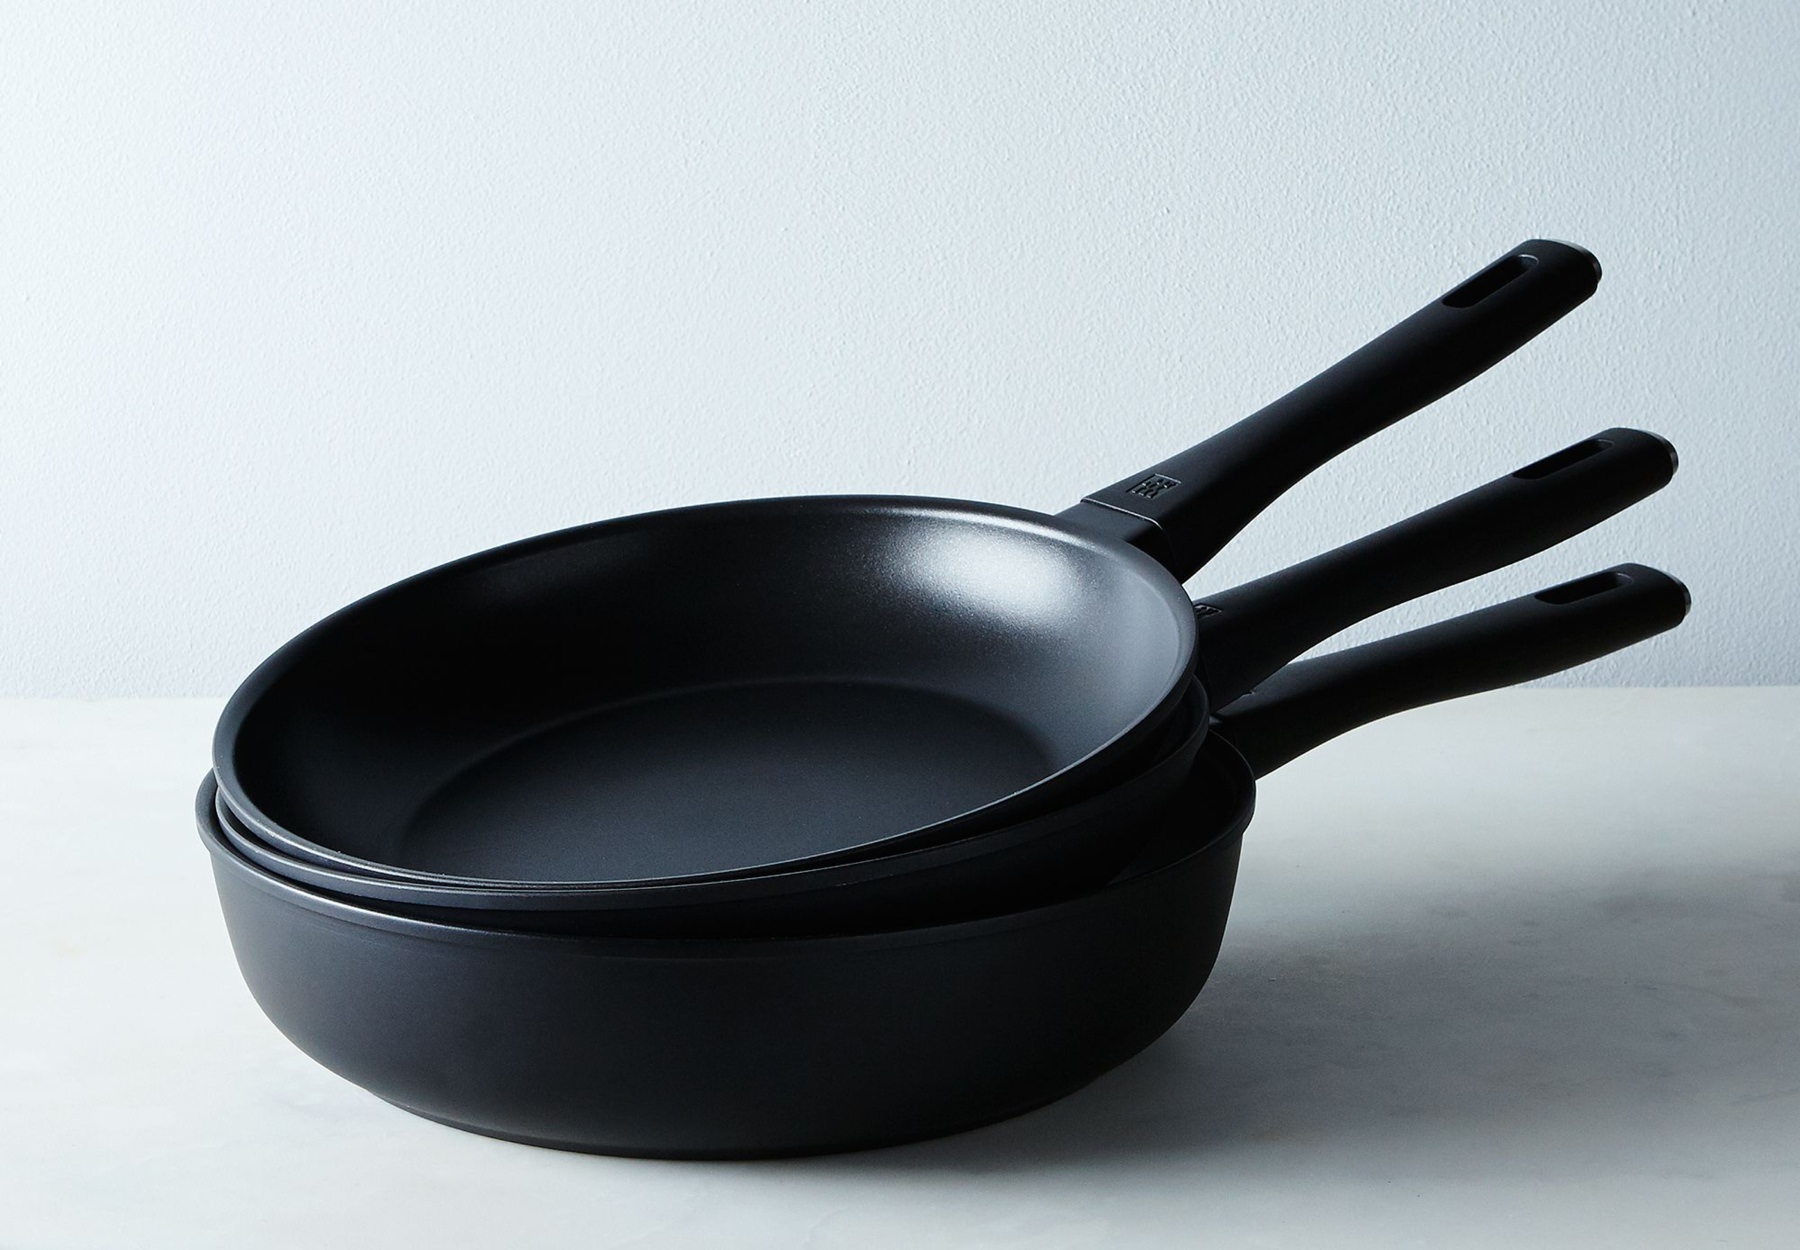 Zwilling Madura Plus nonstick cooking pans